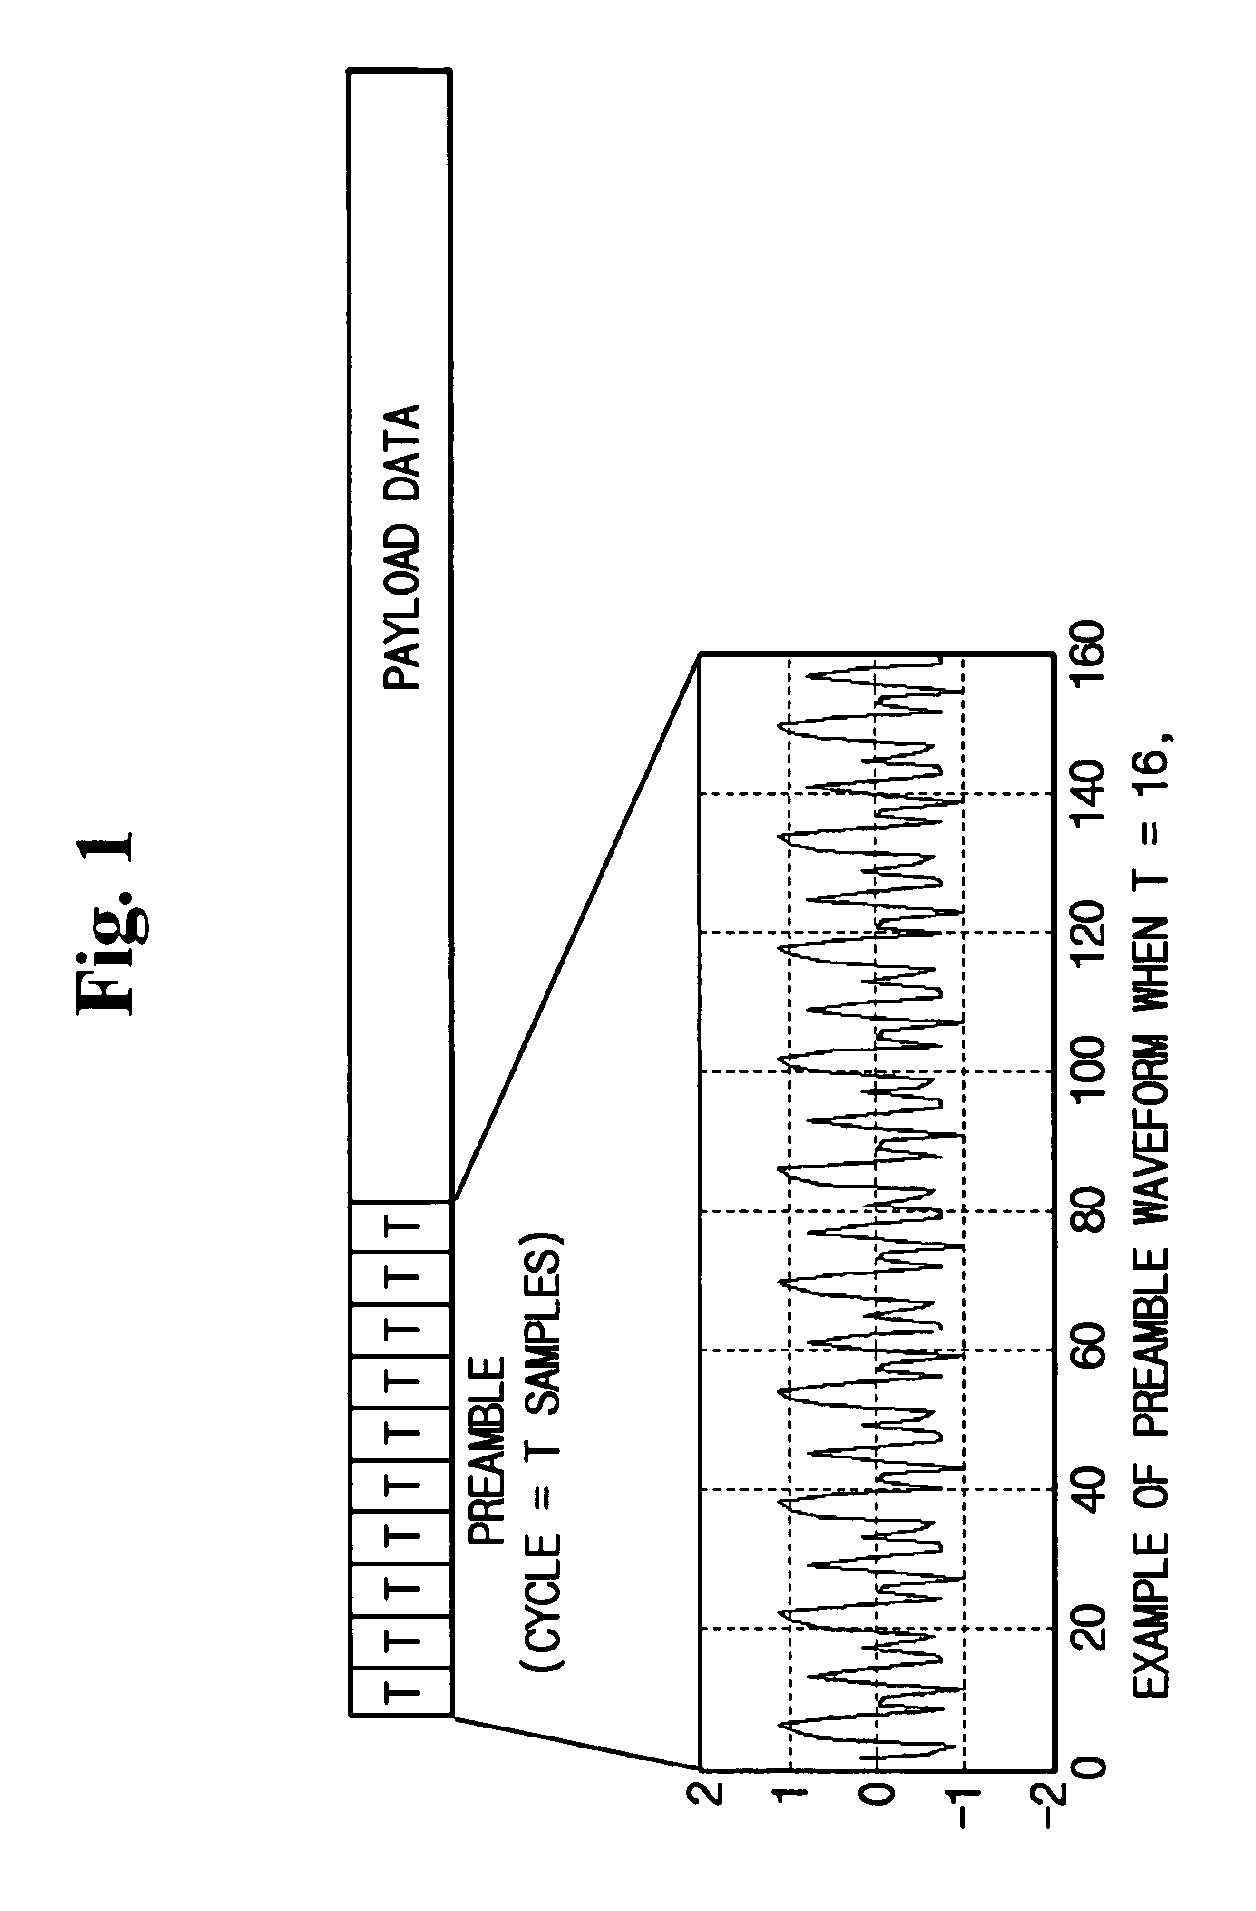 Apparatus for symbol timing detection for wireless communication system